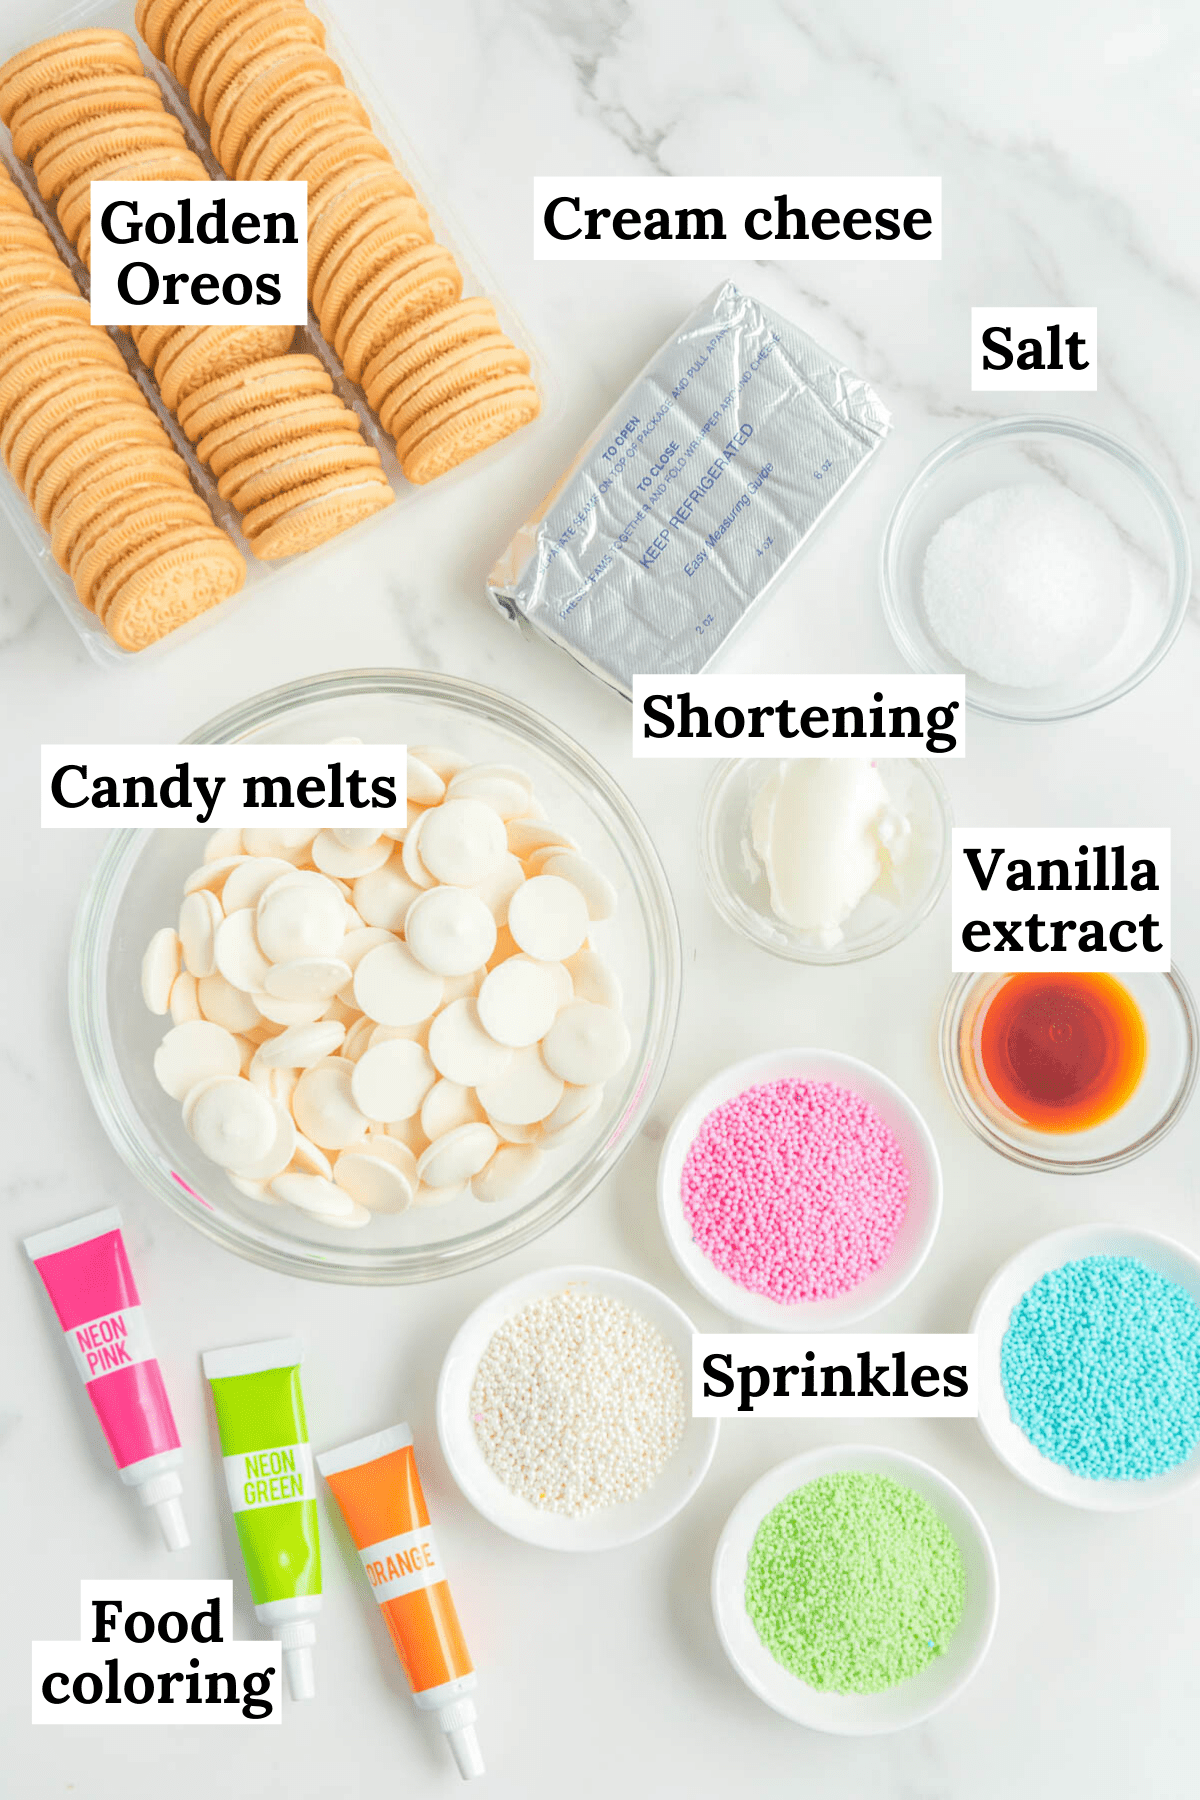 the ingredients for easter egg truffles arranged on a white background, including food coloring, pink, blue, white and green sprinkles, golden oreos, cream cheese, salt, vanilla extract, shortening, and white candy melts